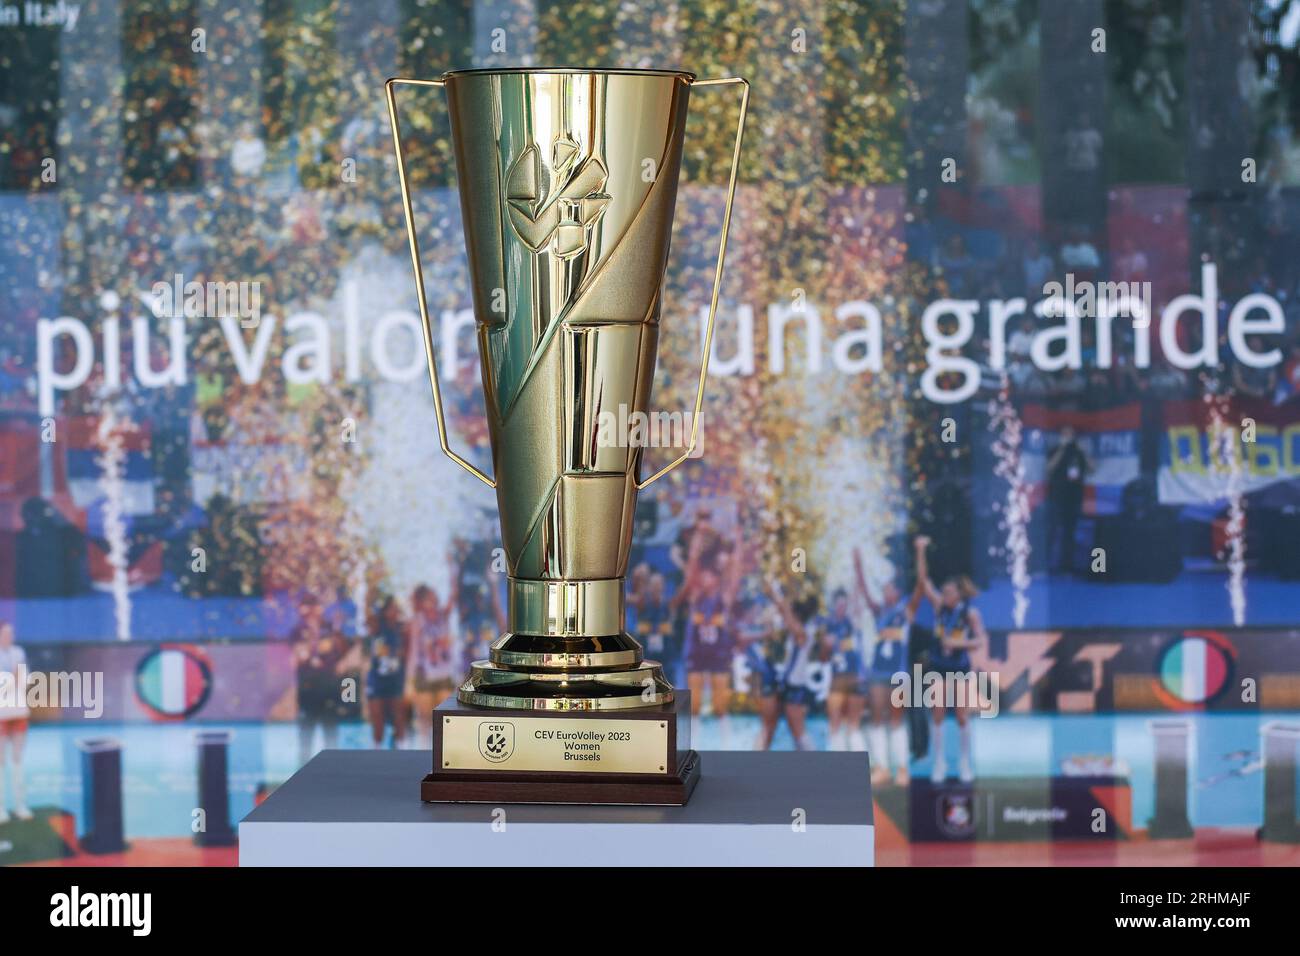 Monza, Italy. 17th Aug, 2023. CEV EuroVolley Women 2023 Trophy seen during the Final Round Pool B volleyball match between Bosnia-Herzegovina and Bulgaria at Arena di Monza. Final Score; Bosnia ed Erzegovina-Bulgaria 1-3 (20-25, 19-25, 25-19, 18-25) Credit: SOPA Images Limited/Alamy Live News Stock Photo